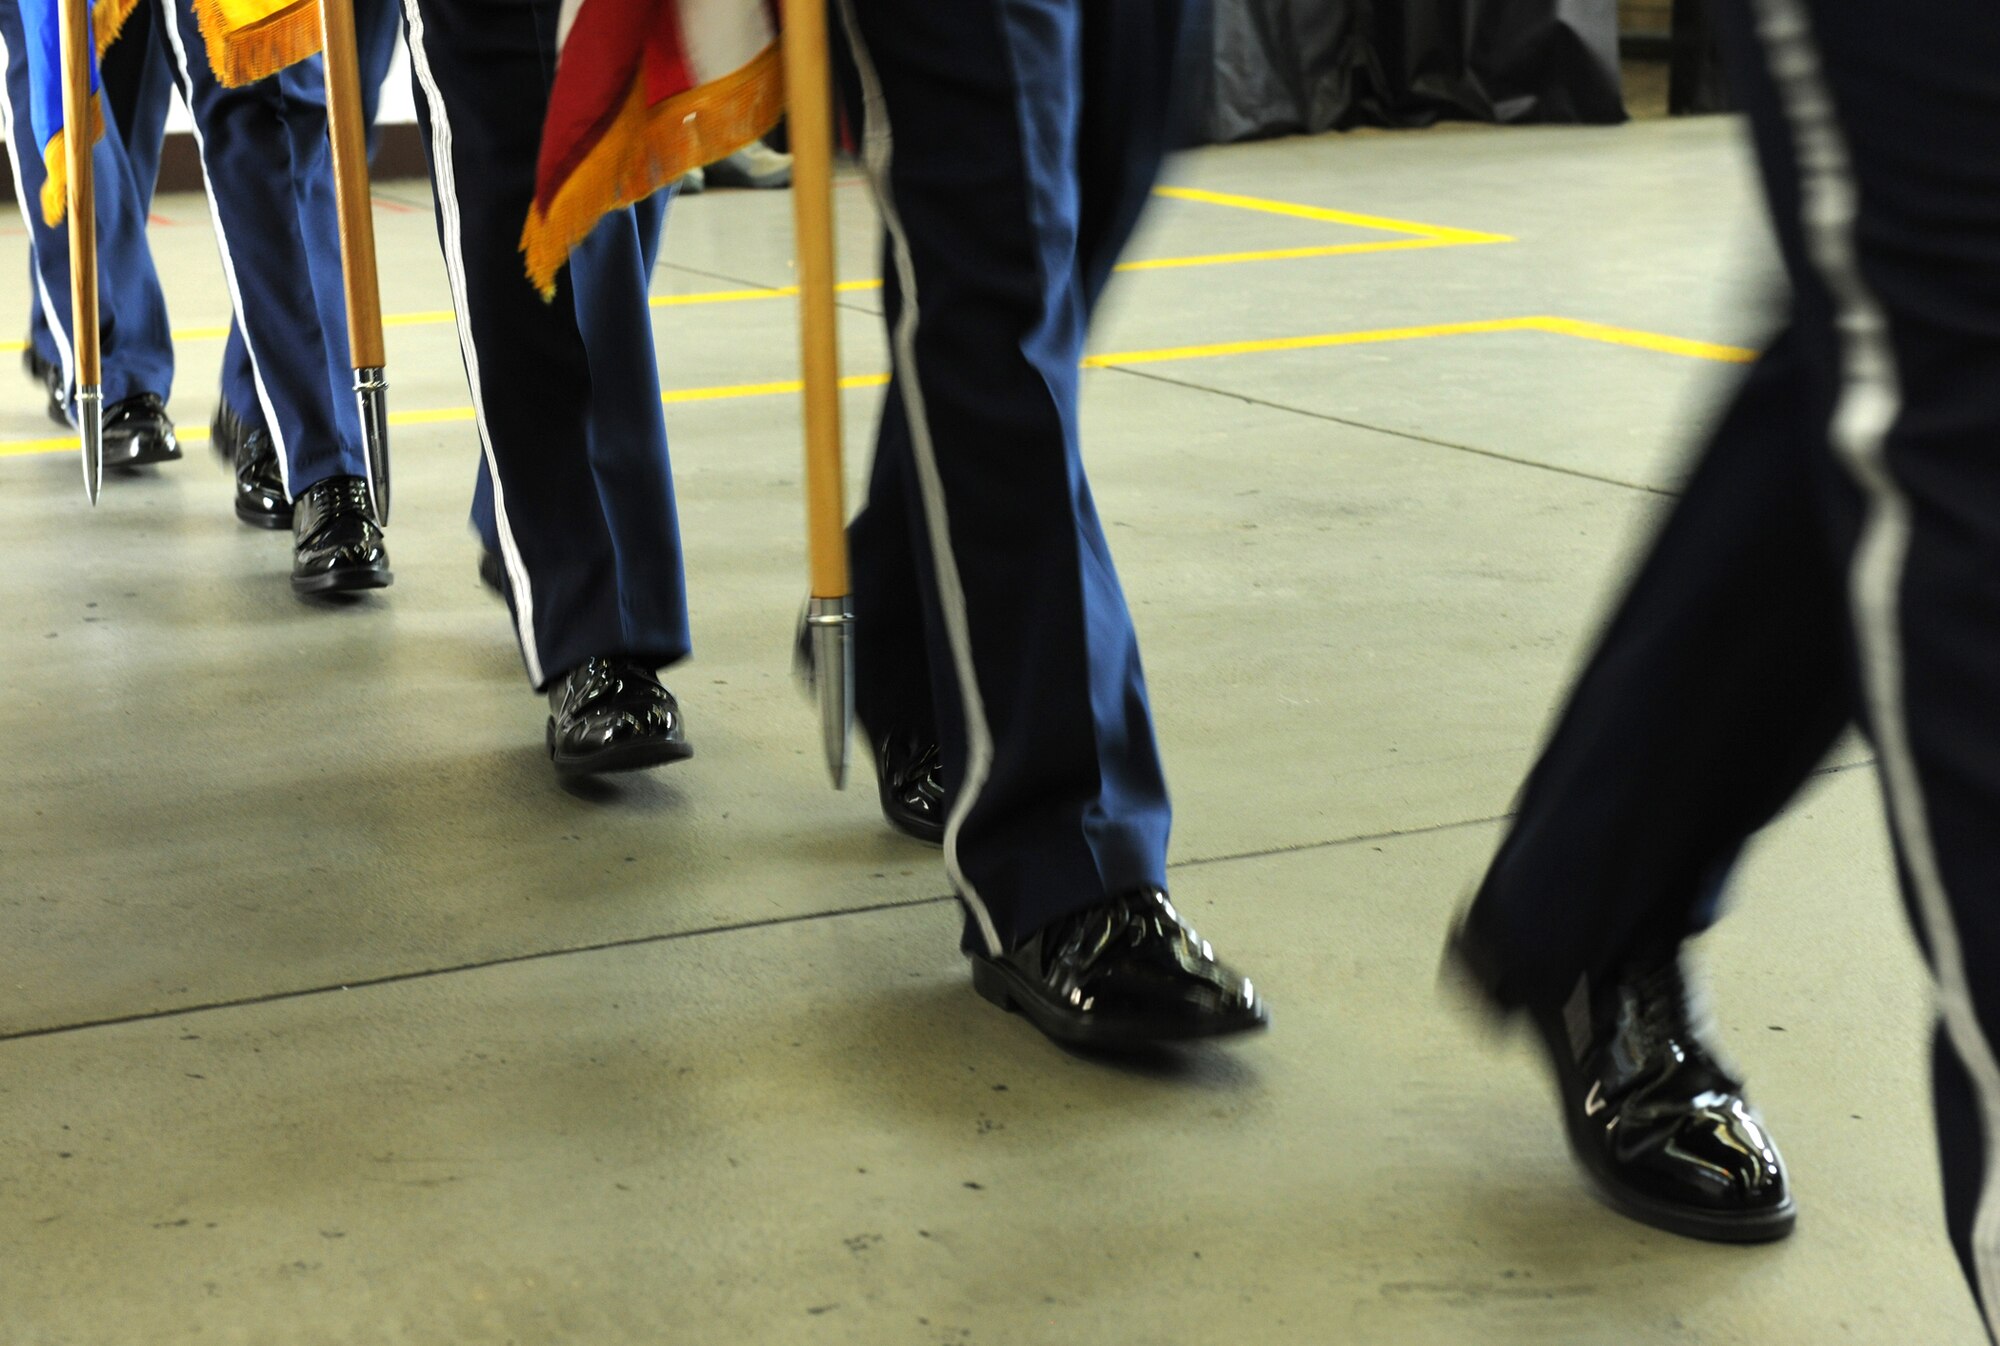 Members of the 52nd Fighter Wing Honor Guard prepare to present the colors at a retirement ceremony April 22, 2011, at Spangdahlem Air Base, Germany. (U.S. Air Force photo/Senior Airman Nathanael Callon)